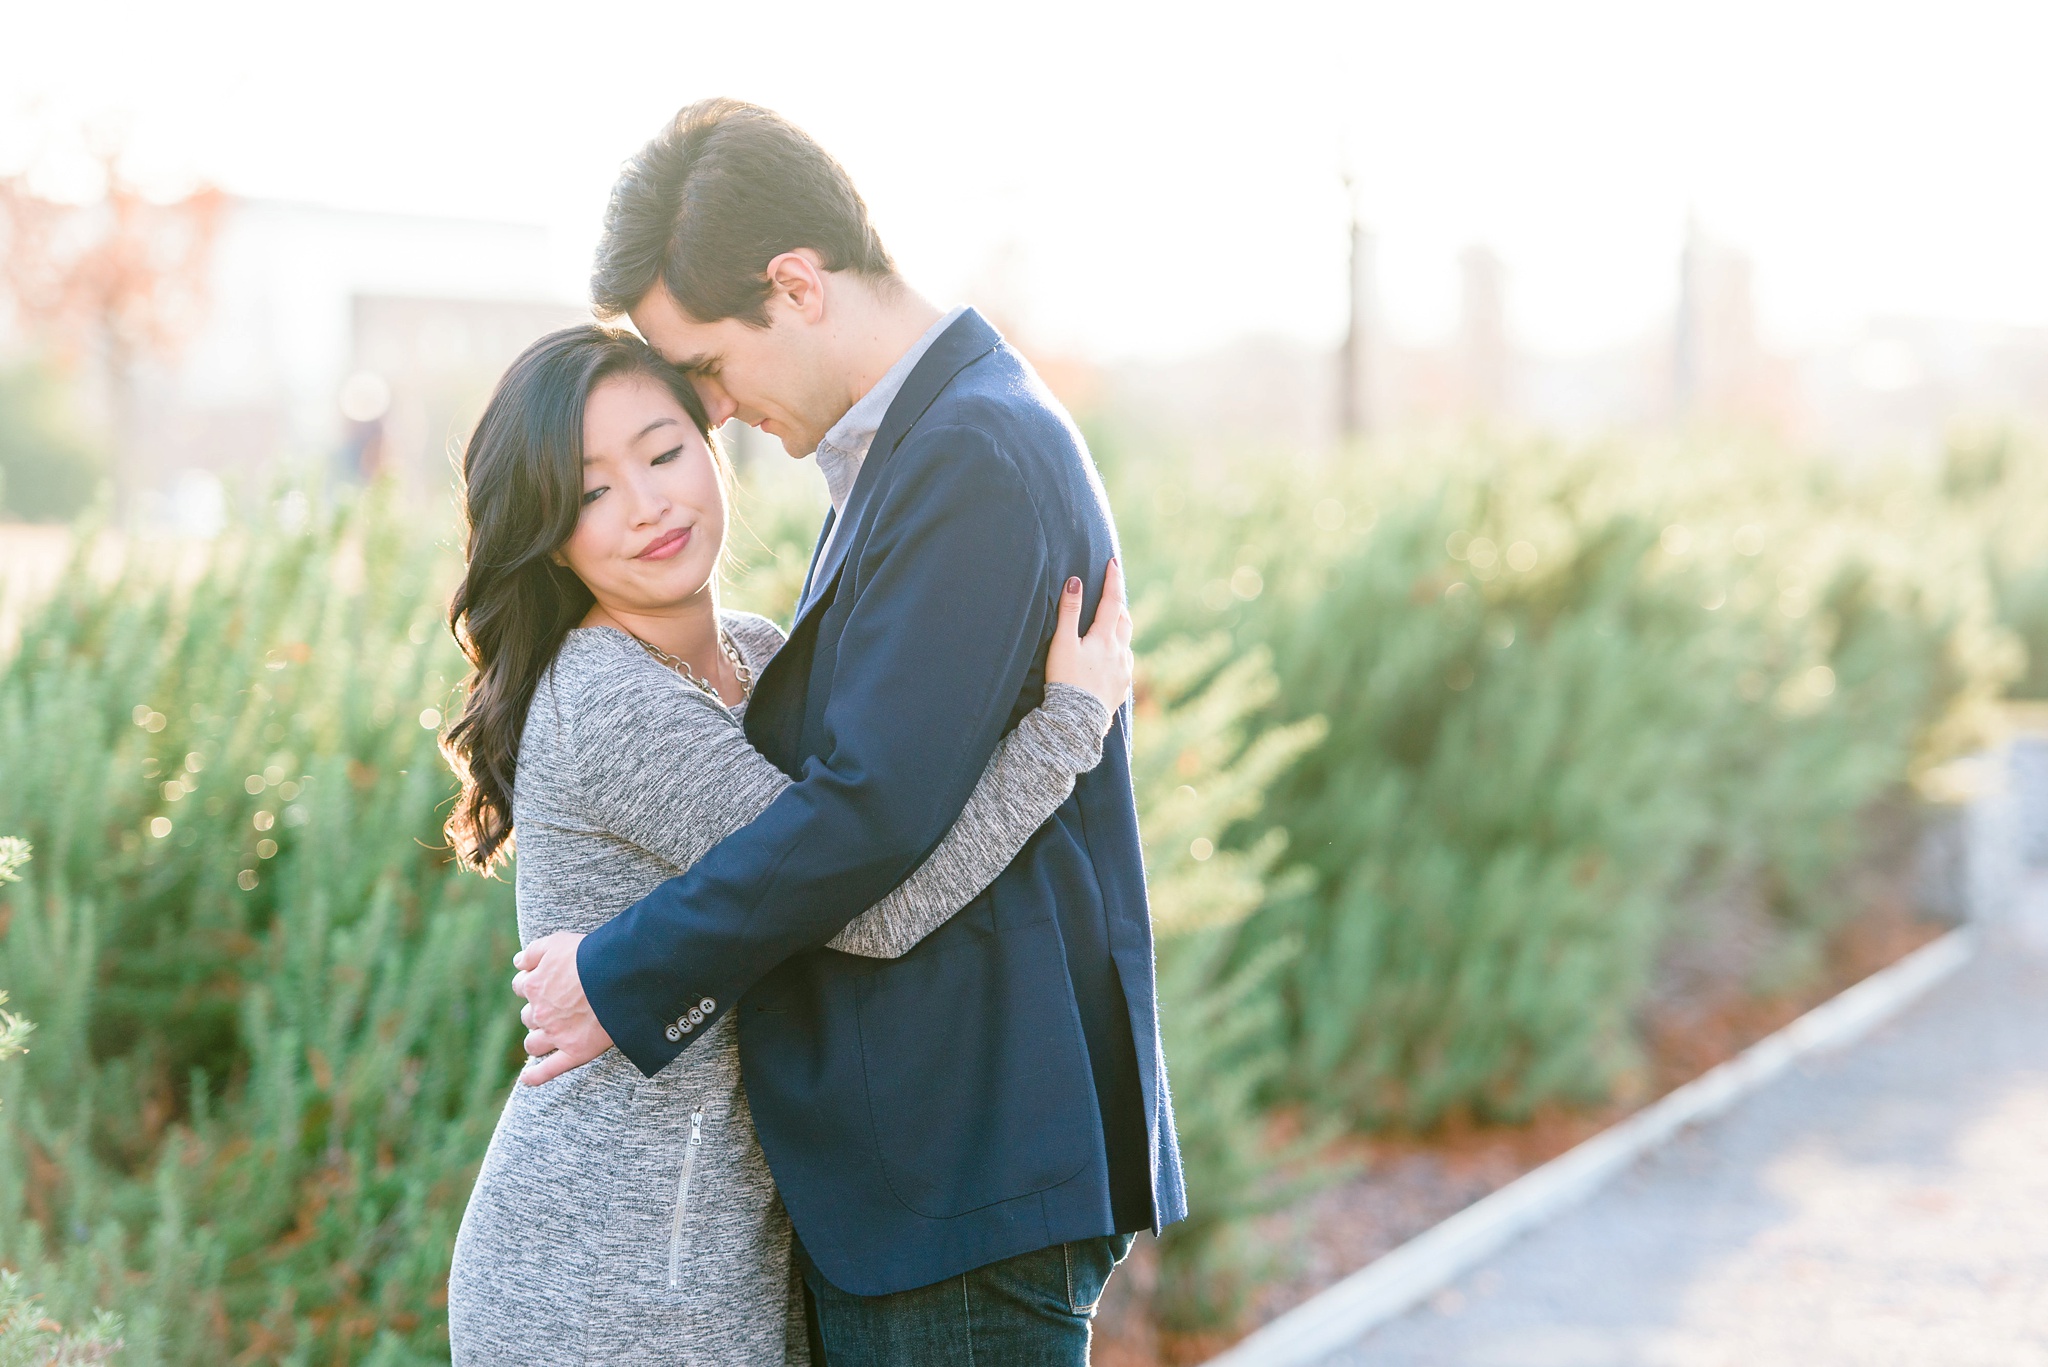 Downtown Nice to Have You in Birmingham Engagement Session| Birmingham Alabama Wedding Photographers_0016.jpg